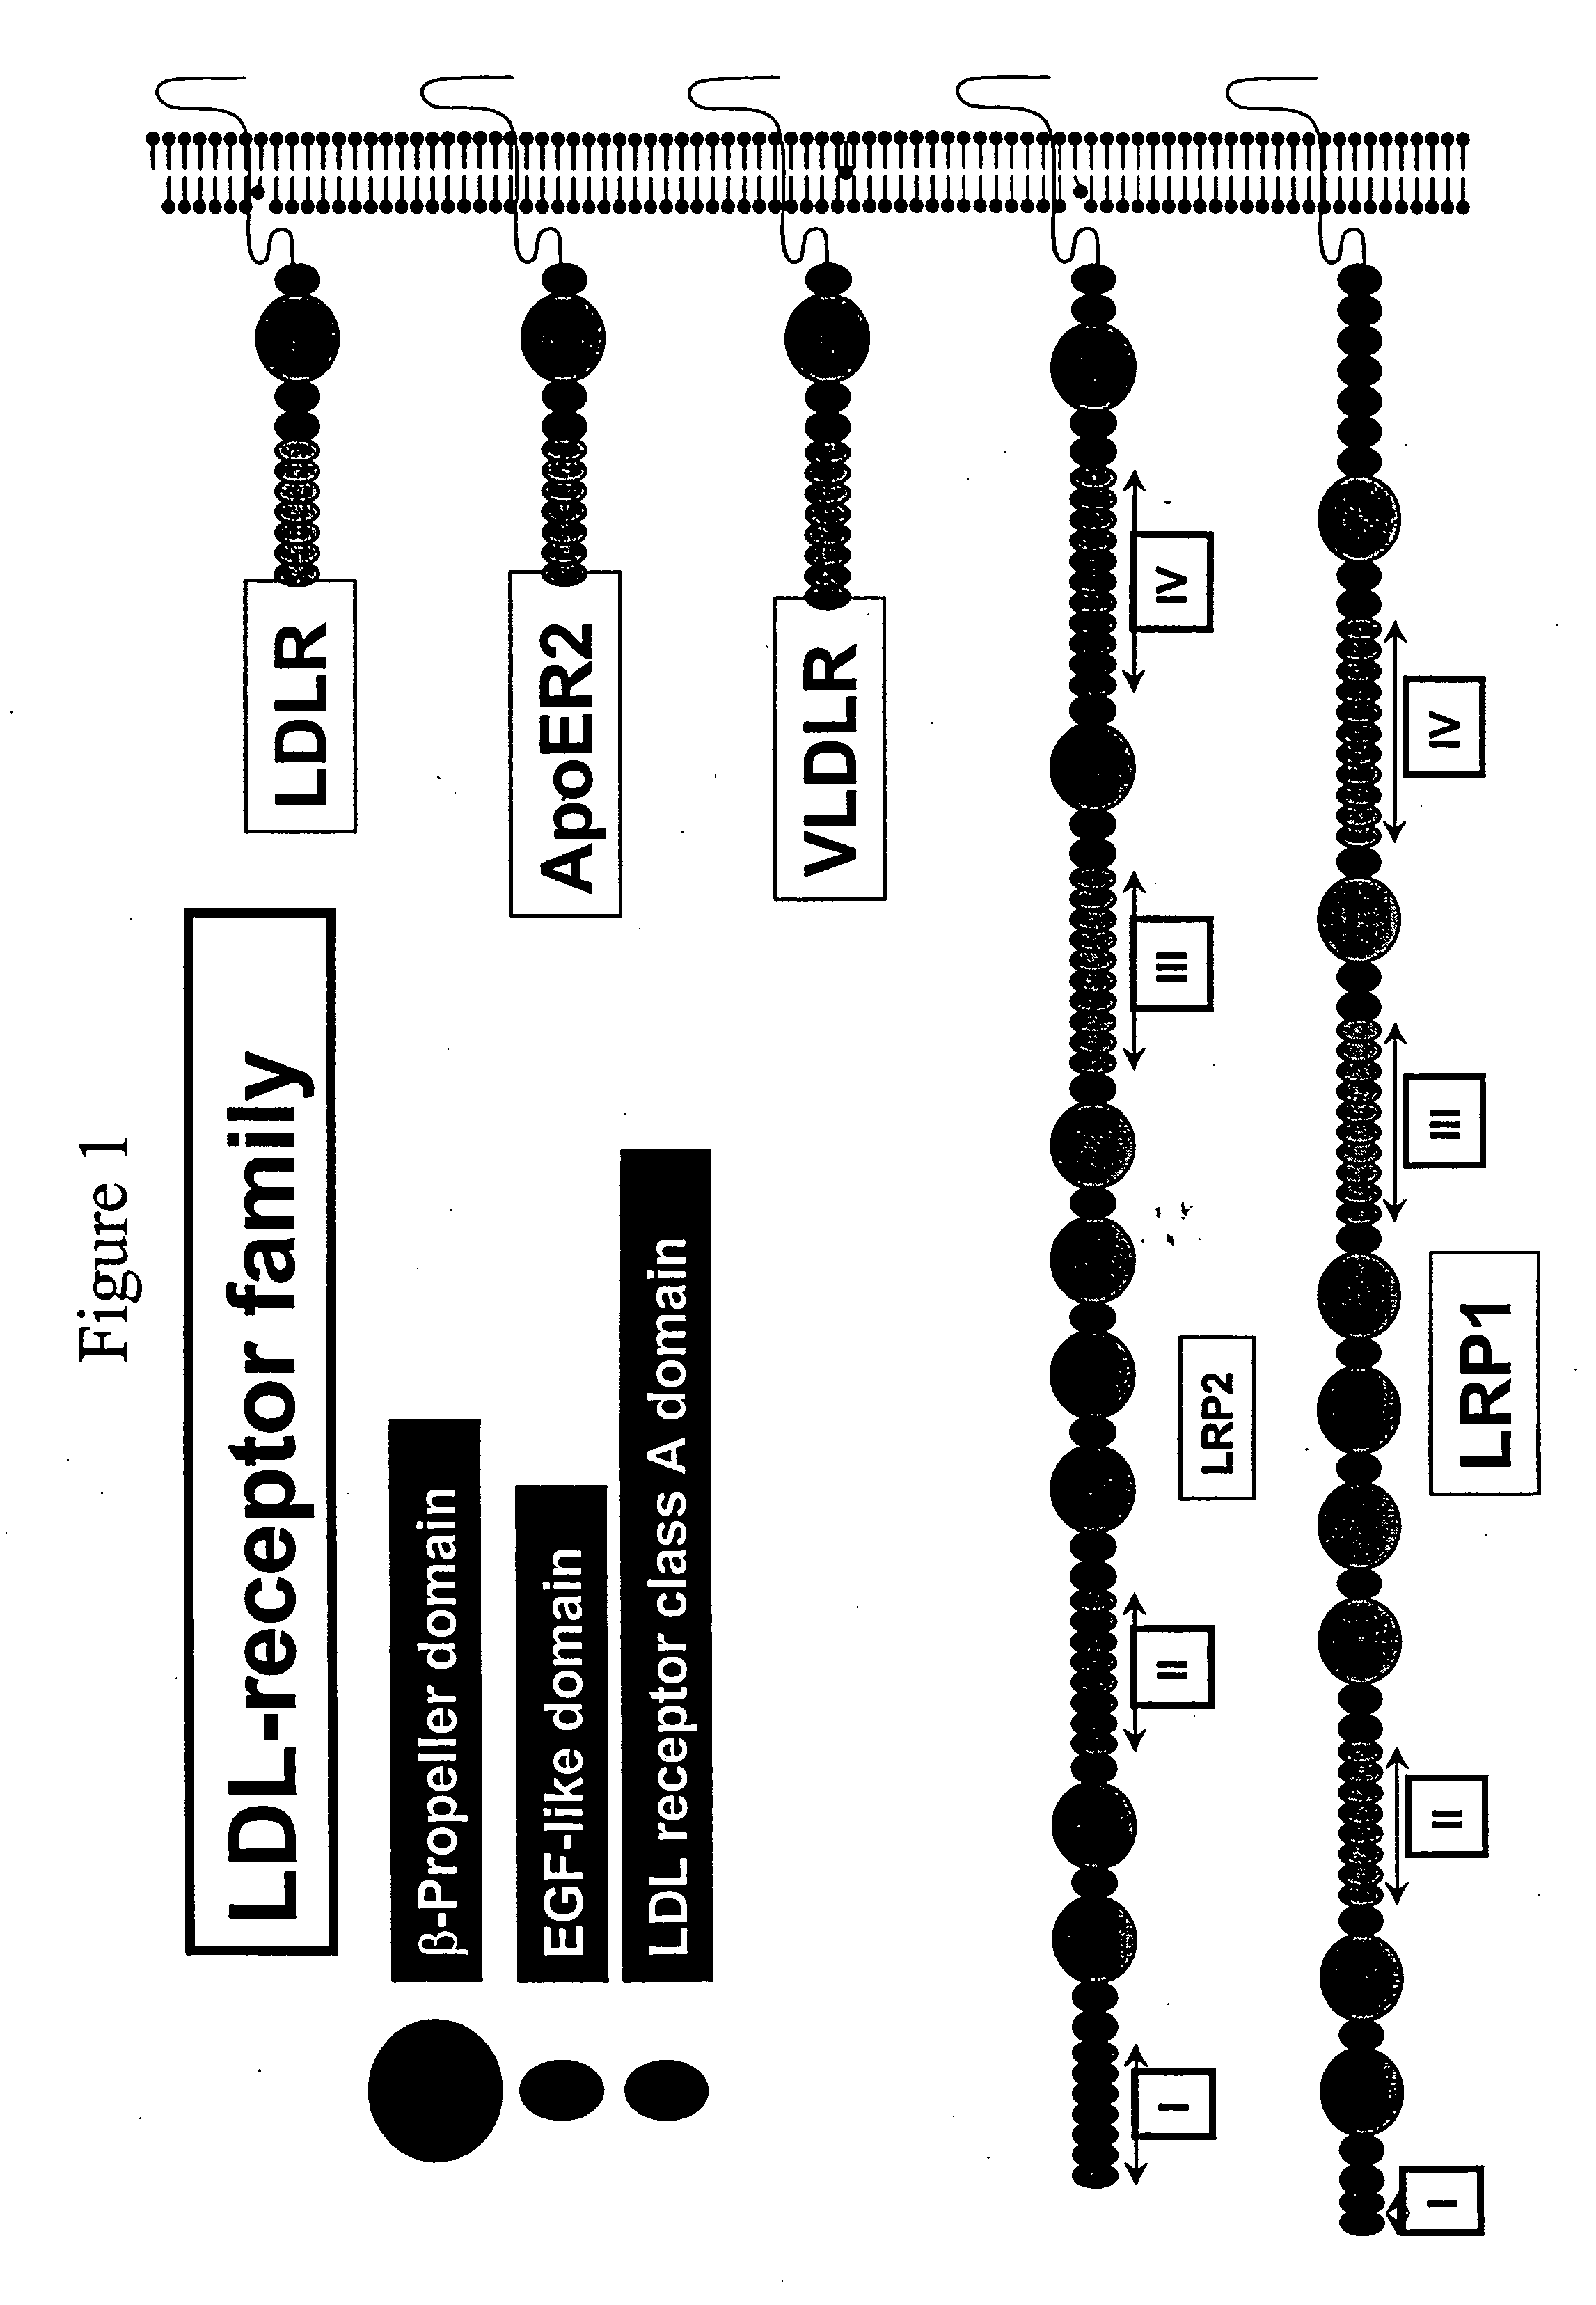 Combinatorial libraries of monomer domains